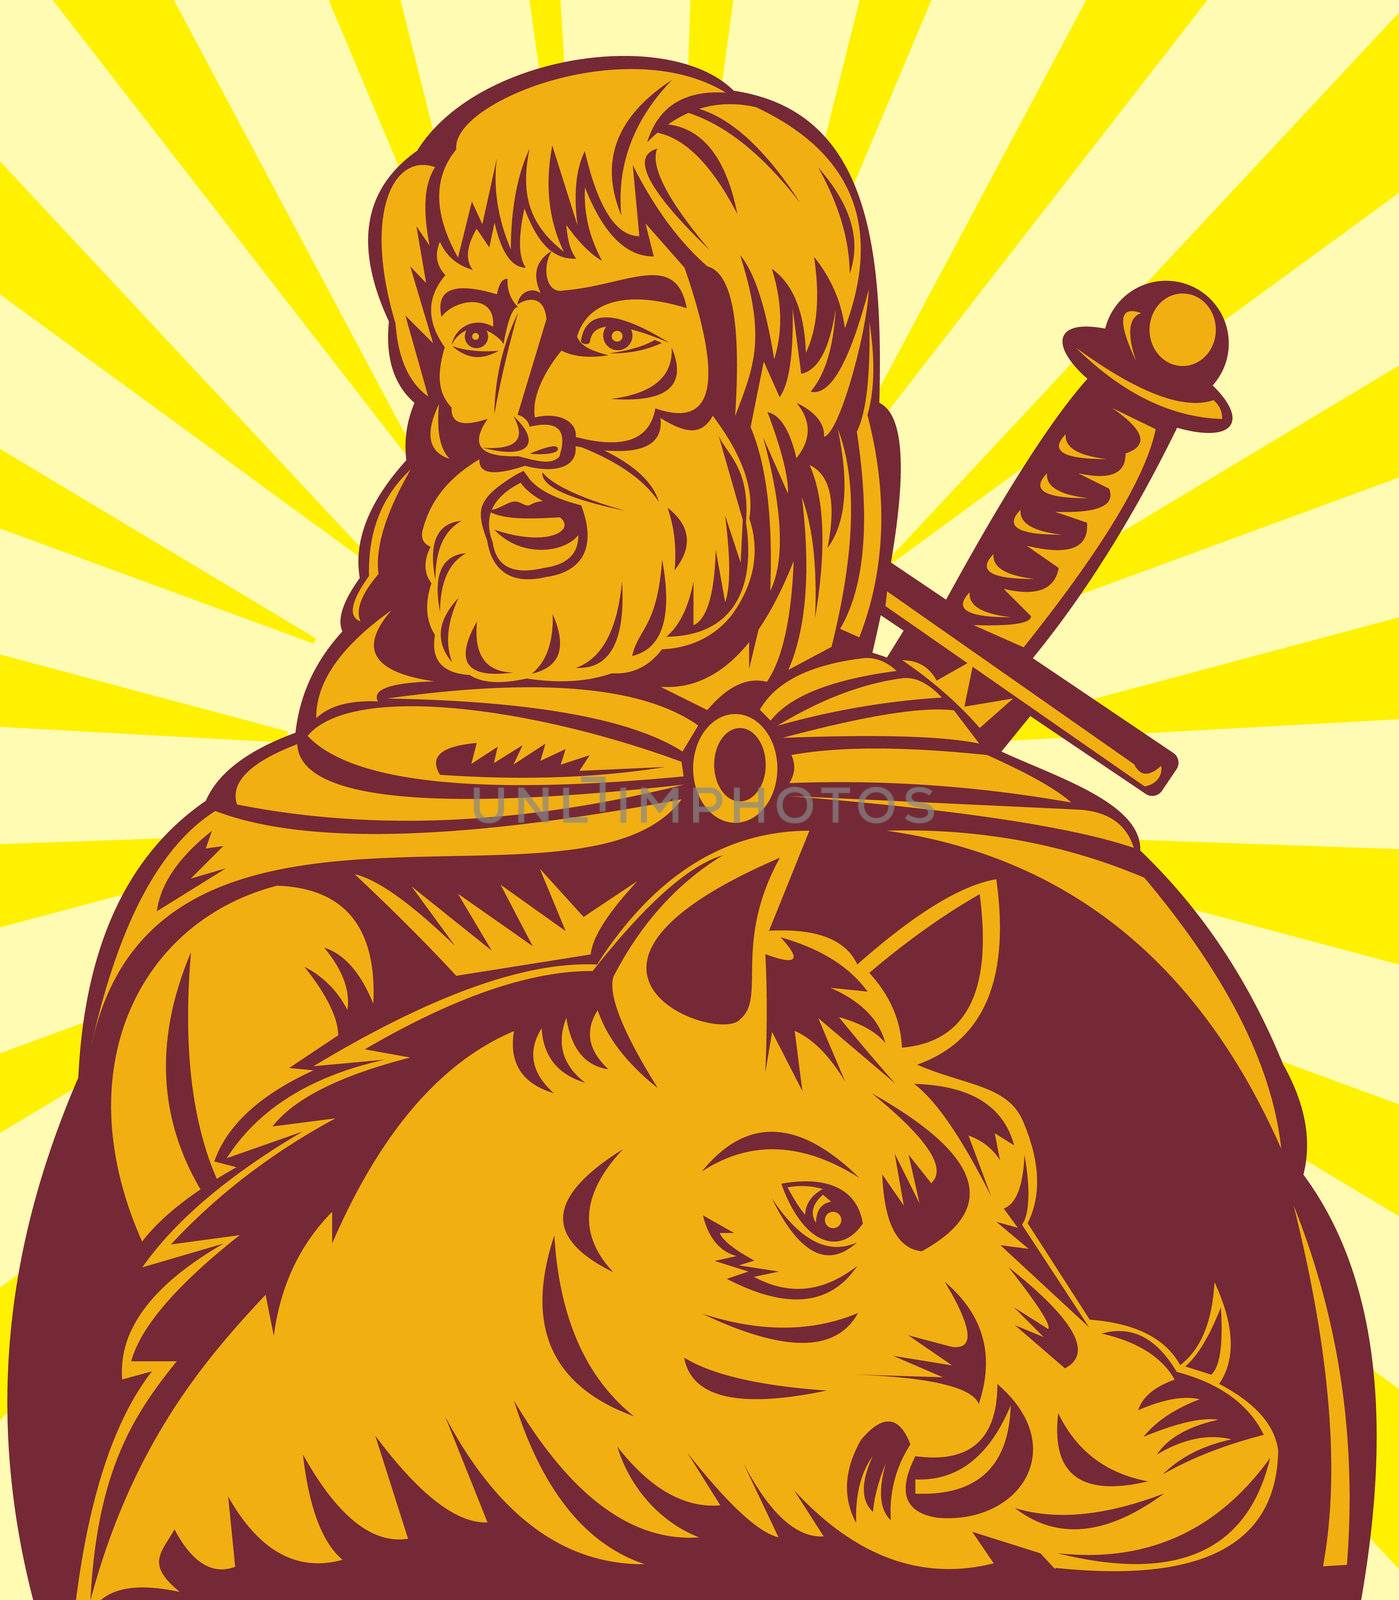 illustration of Frey the  Norse god of agriculture with sword and boar